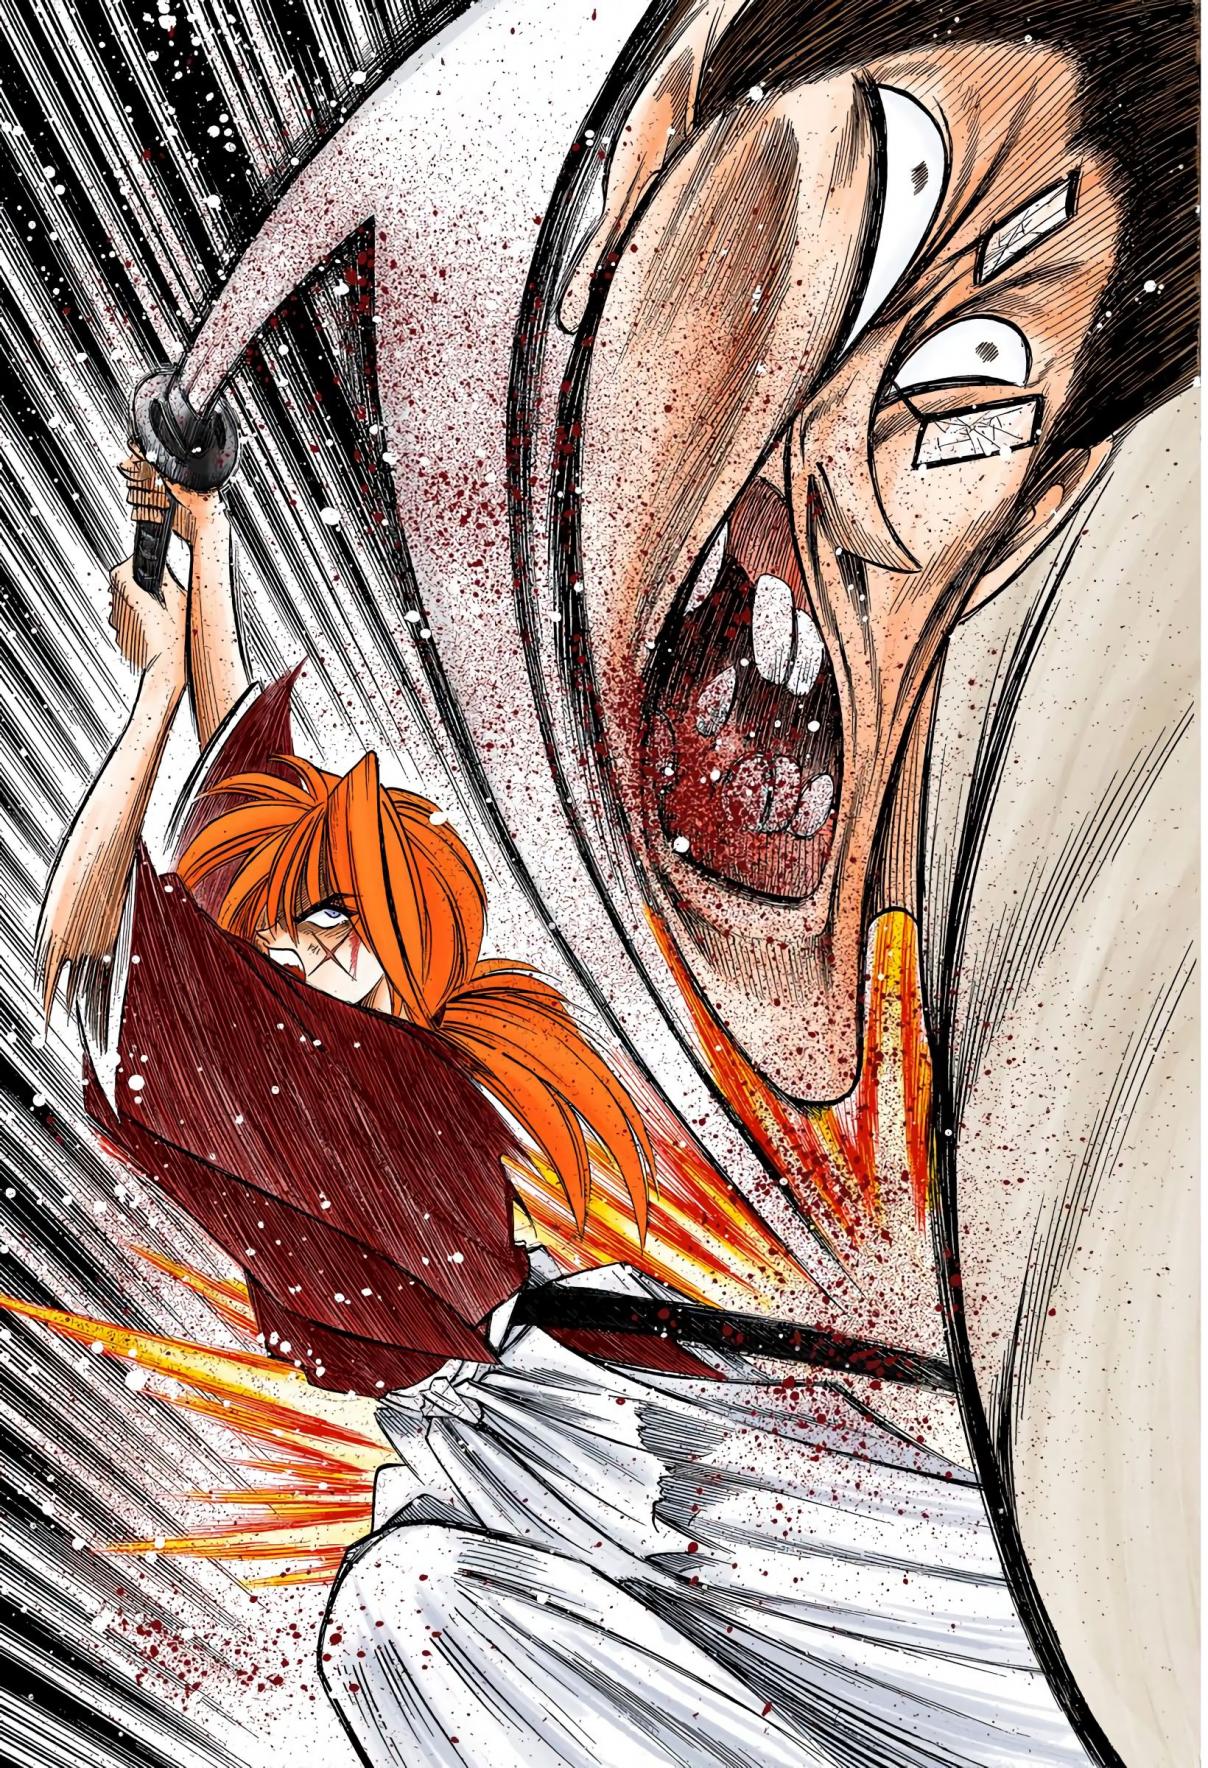 Rurouni Kenshin Digital Colored Comics Vol. 4 Ch. 28 The End of a Duel to the Death